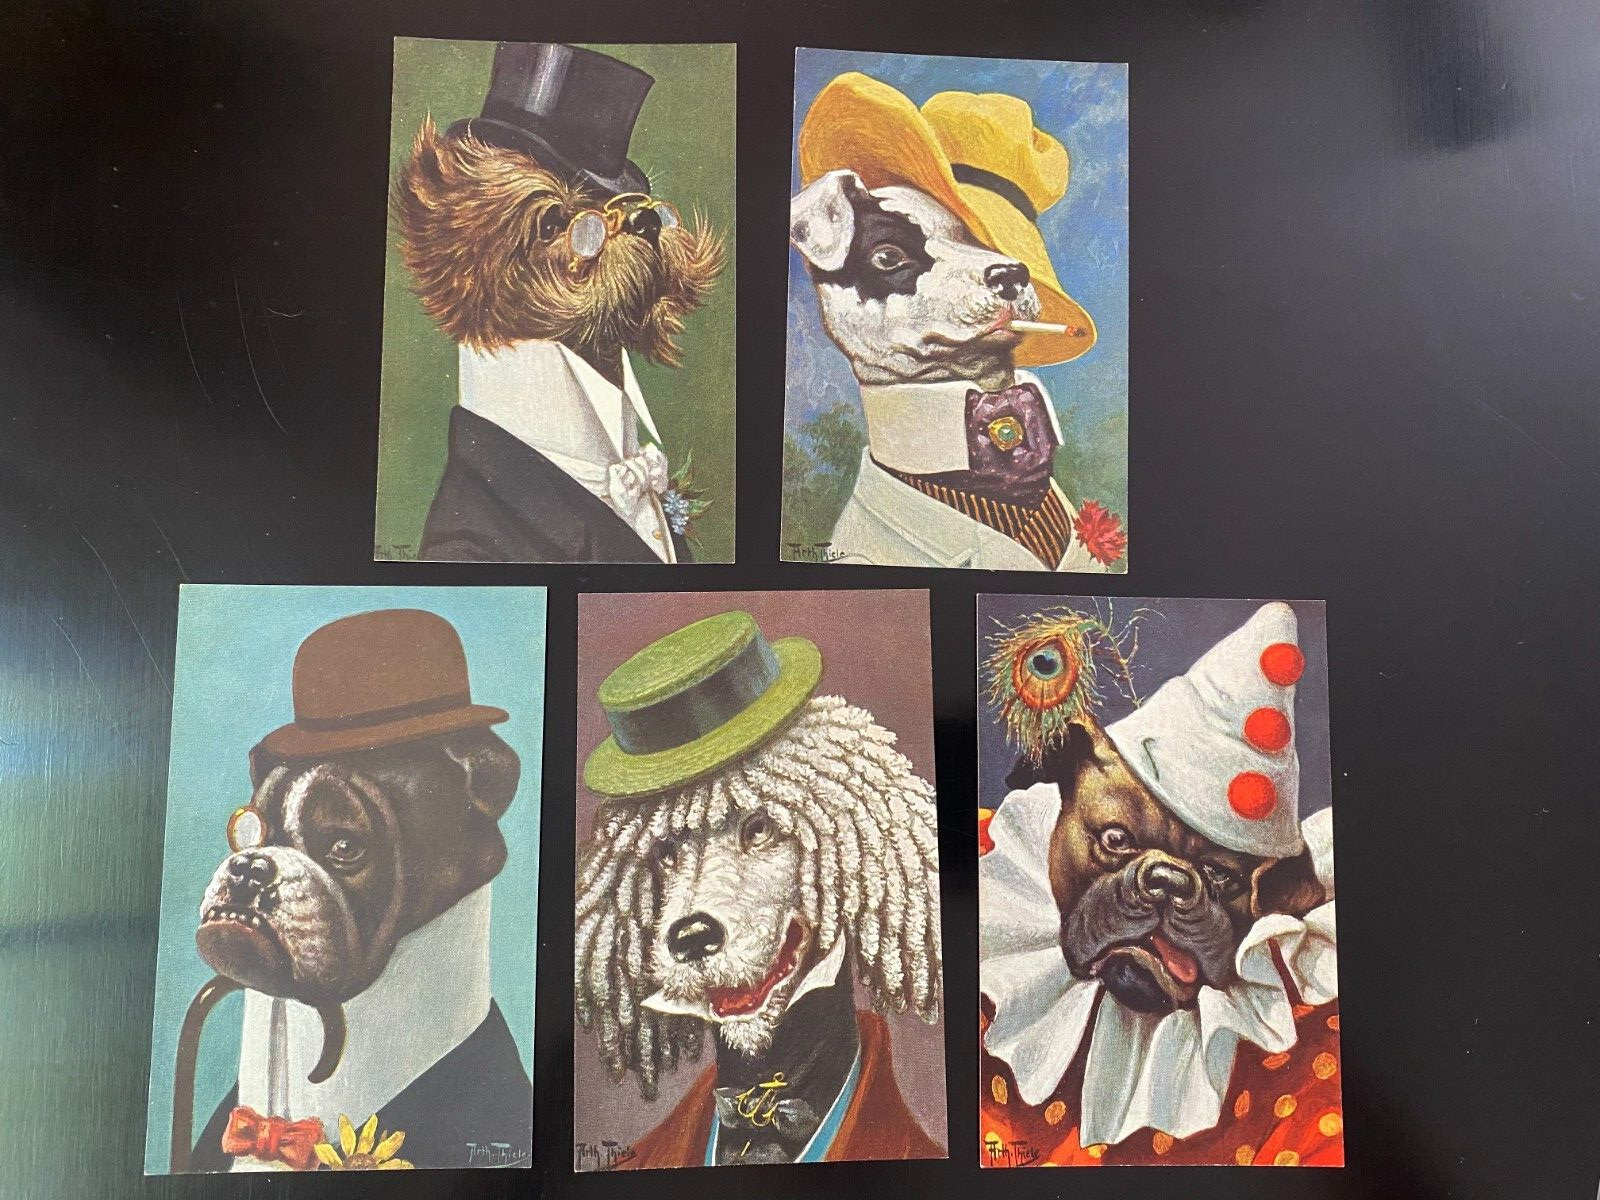 Set of 5 Postcards, Arthur Thiele, G-A Novelty 806, Anthropomorphic Dressed Dogs